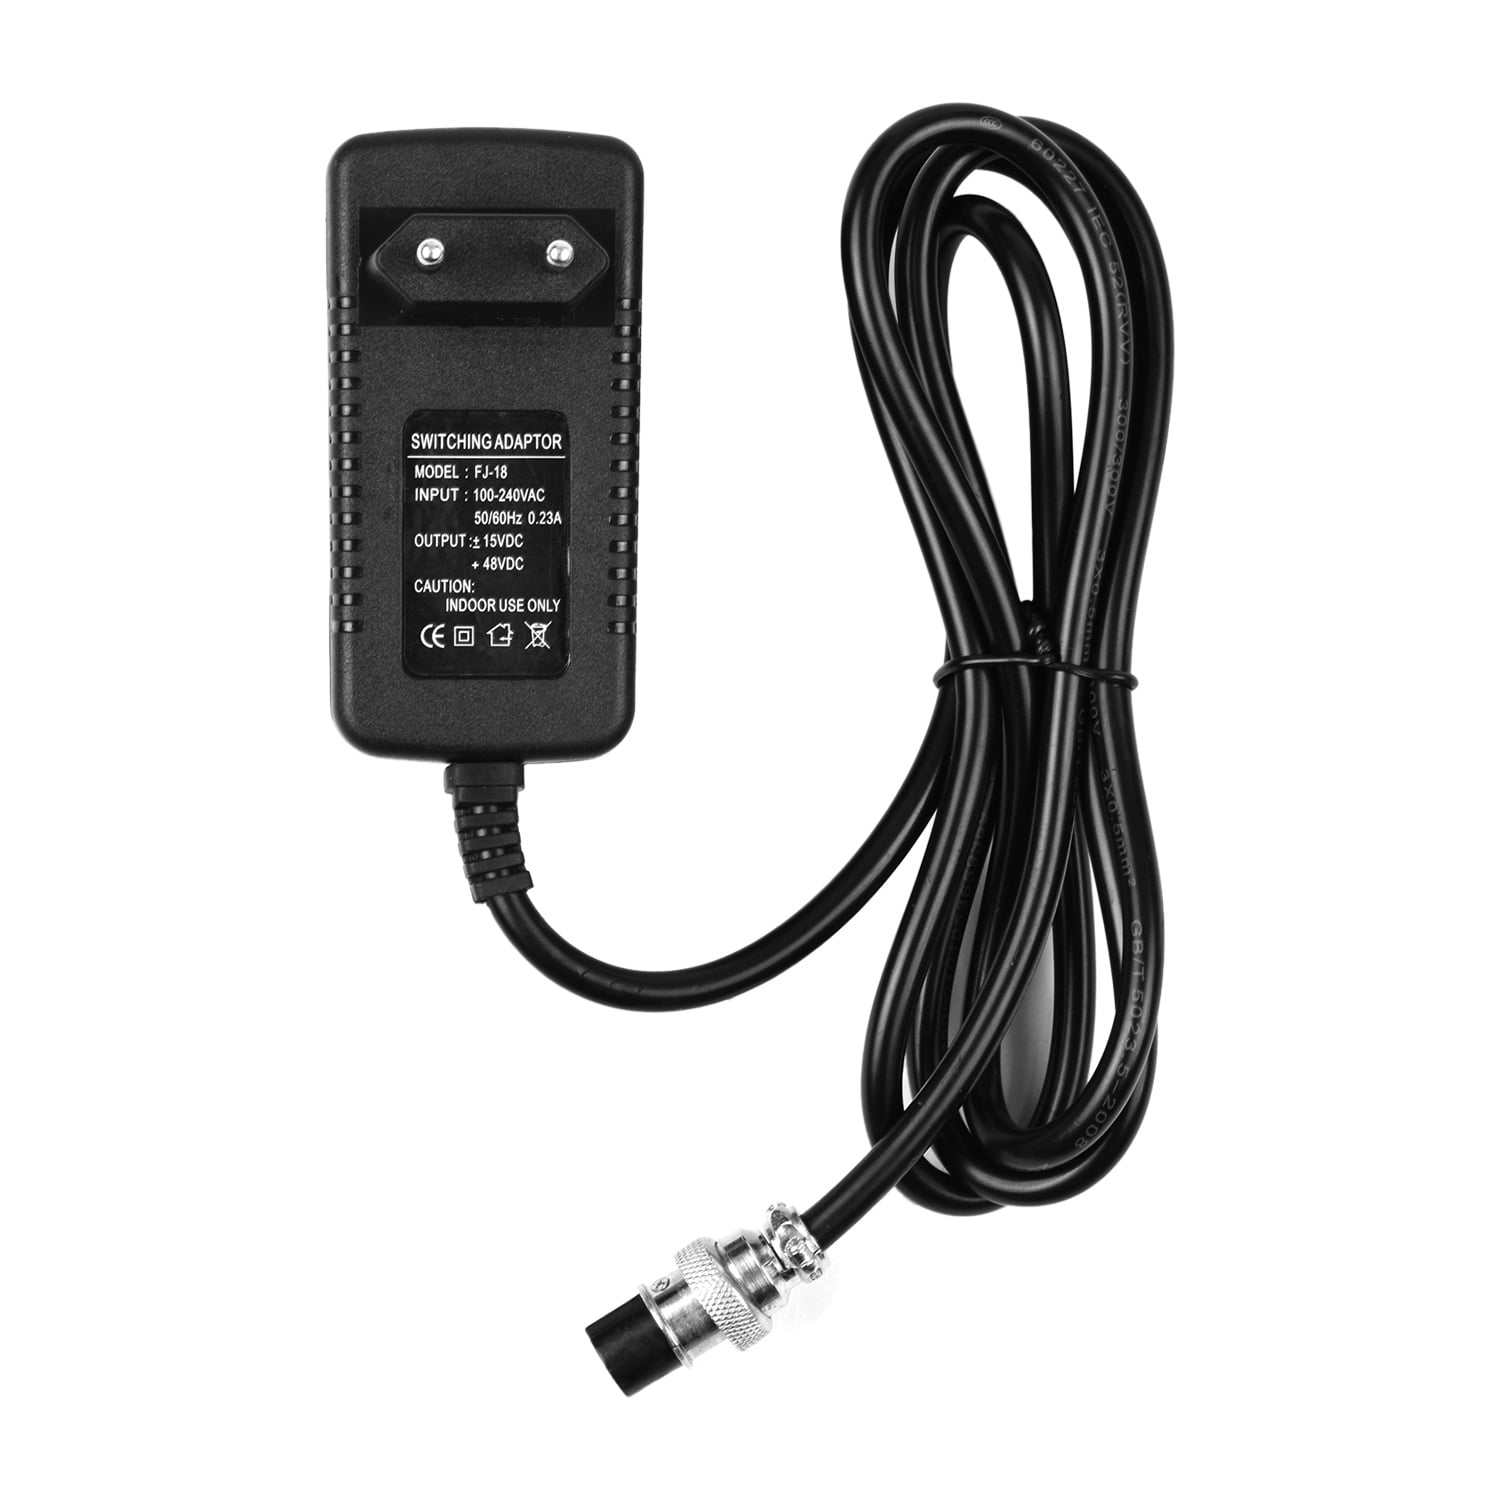 Intrusion Meningsløs veteran Mixing Console Mixer Power Supply AC Adapter 15V 230mA Universal 4-Pin  Round Connector for 16 Channels or below Mixing Consoles Replacement  Accessories Input Plug - Walmart.com